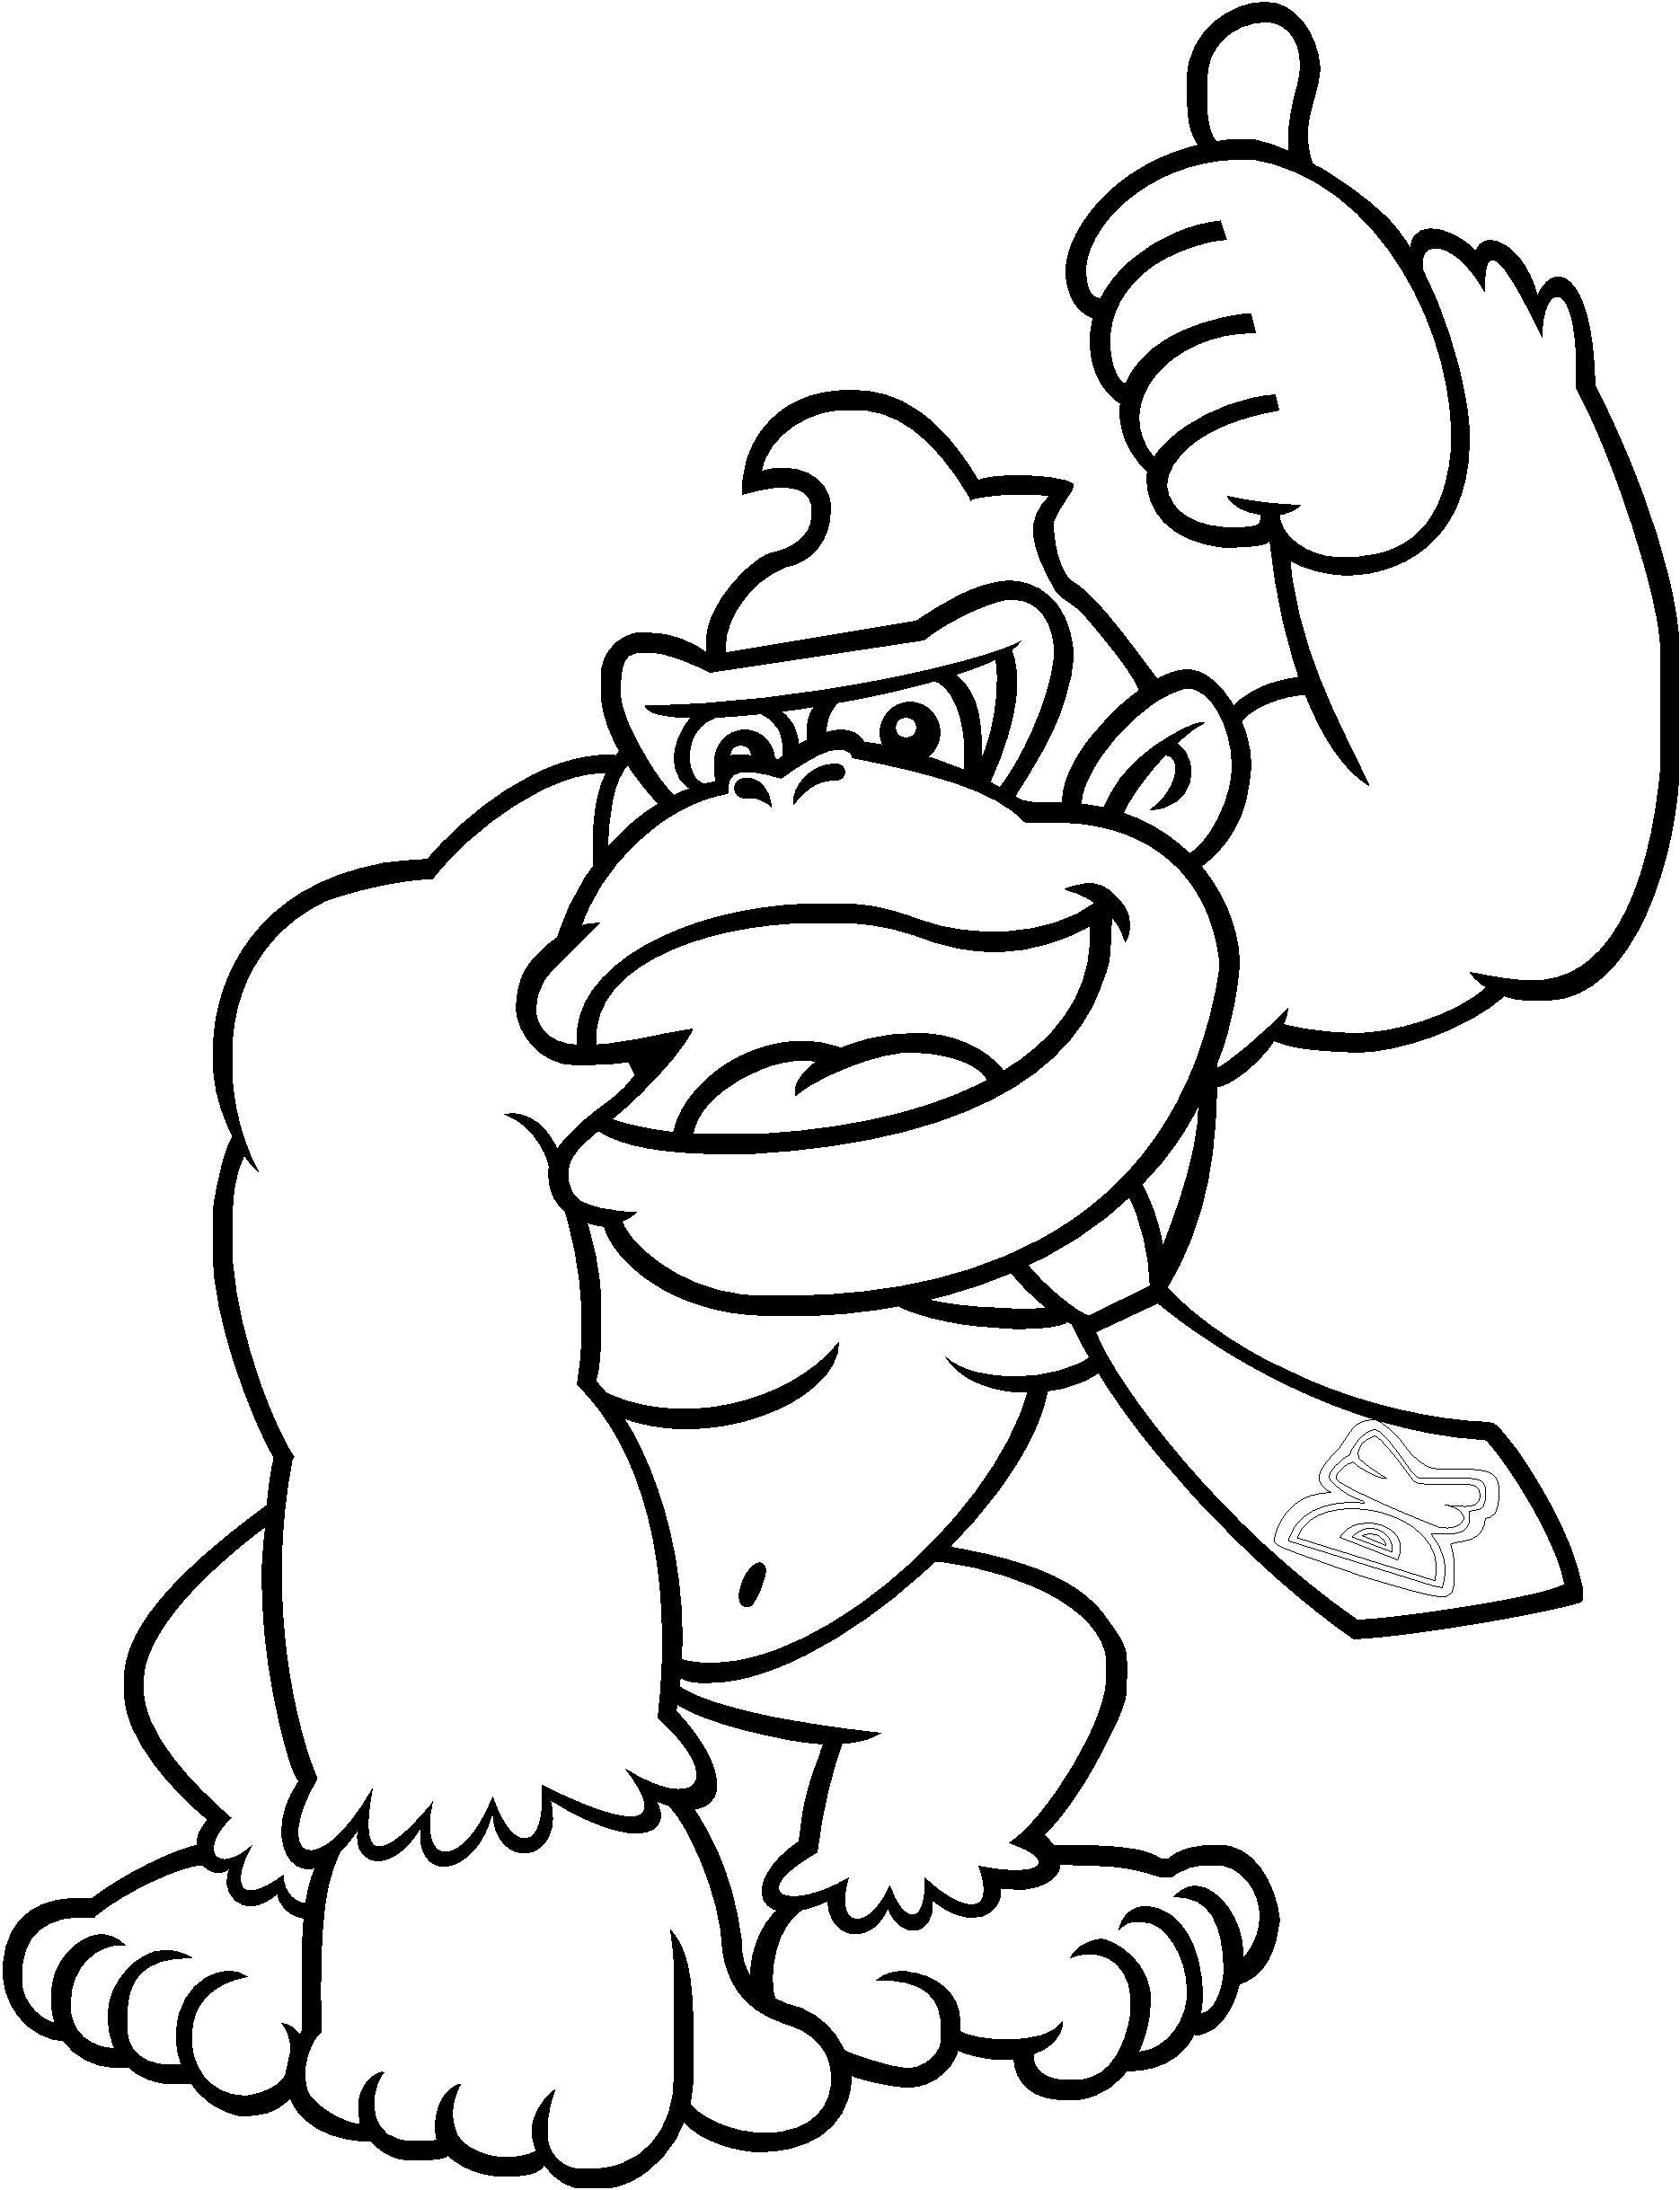 Donkey Kong Coloring Page - Coloring Pages for Kids and for Adults